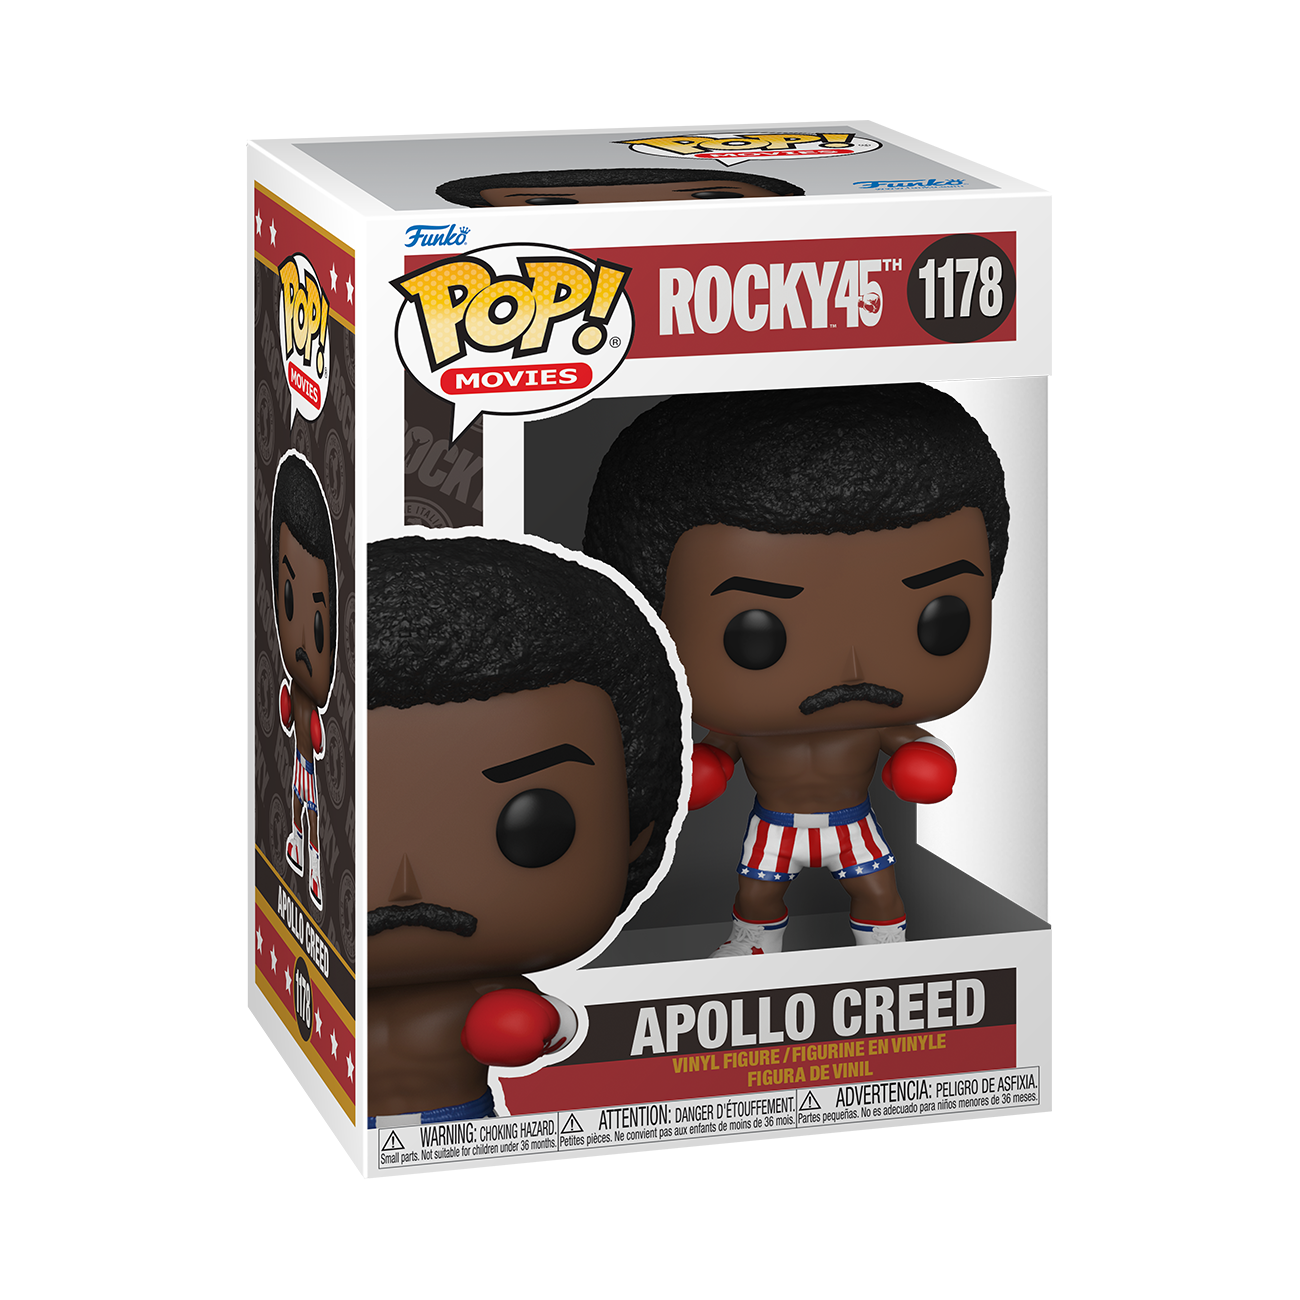  APOLLO CREED FUNKO POP! MOVIES ROCKY 45TH ANNIVERSARY CARL WEATHERS BOXING #1178 </p><BR>In Stock<BR>In Stock Safety Information<br>Warning: Not suitable for children under 3 years. Small Parts. 